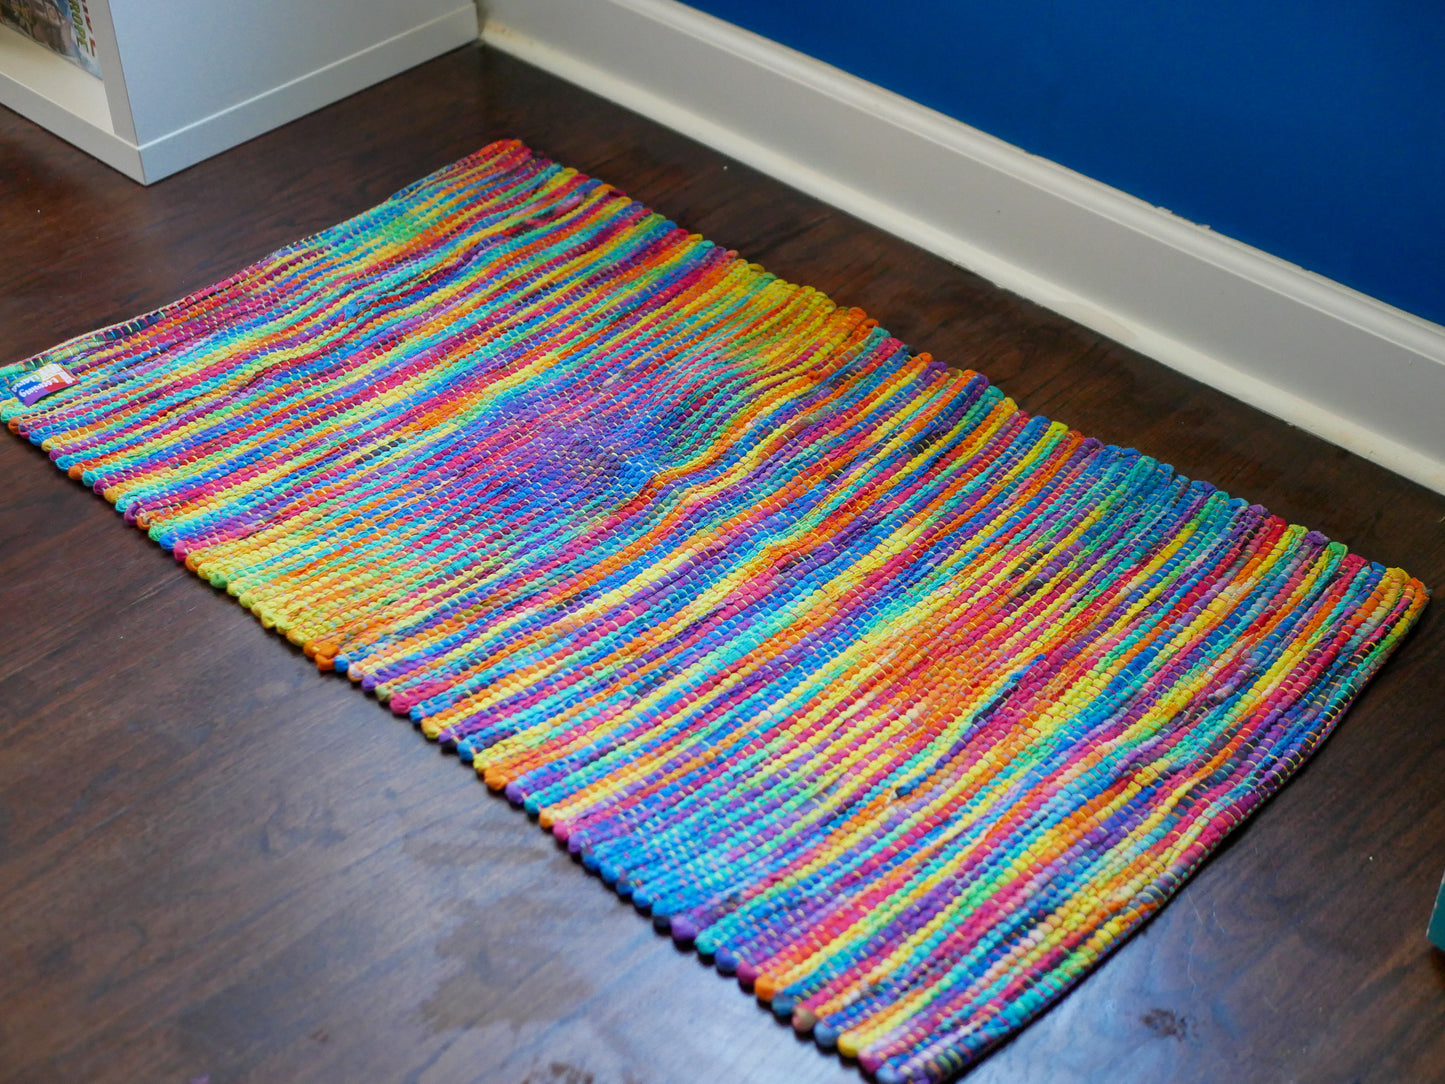 Rag rug - 23 inches x 36 inches